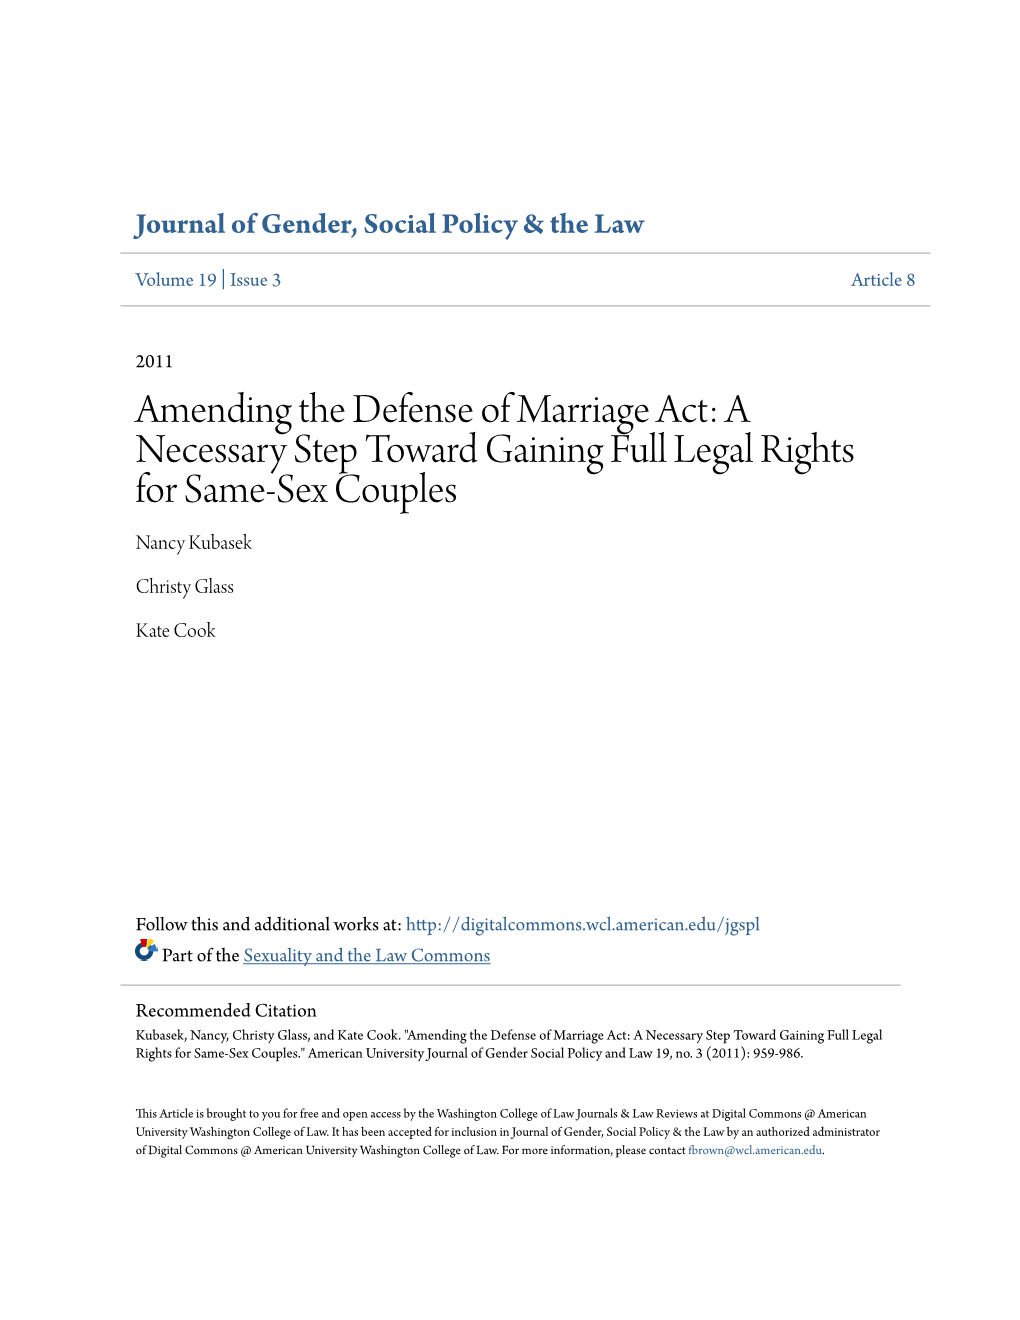 Amending the Defense of Marriage Act: a Necessary Step Toward Gaining Full Legal Rights for Same-Sex Couples Nancy Kubasek